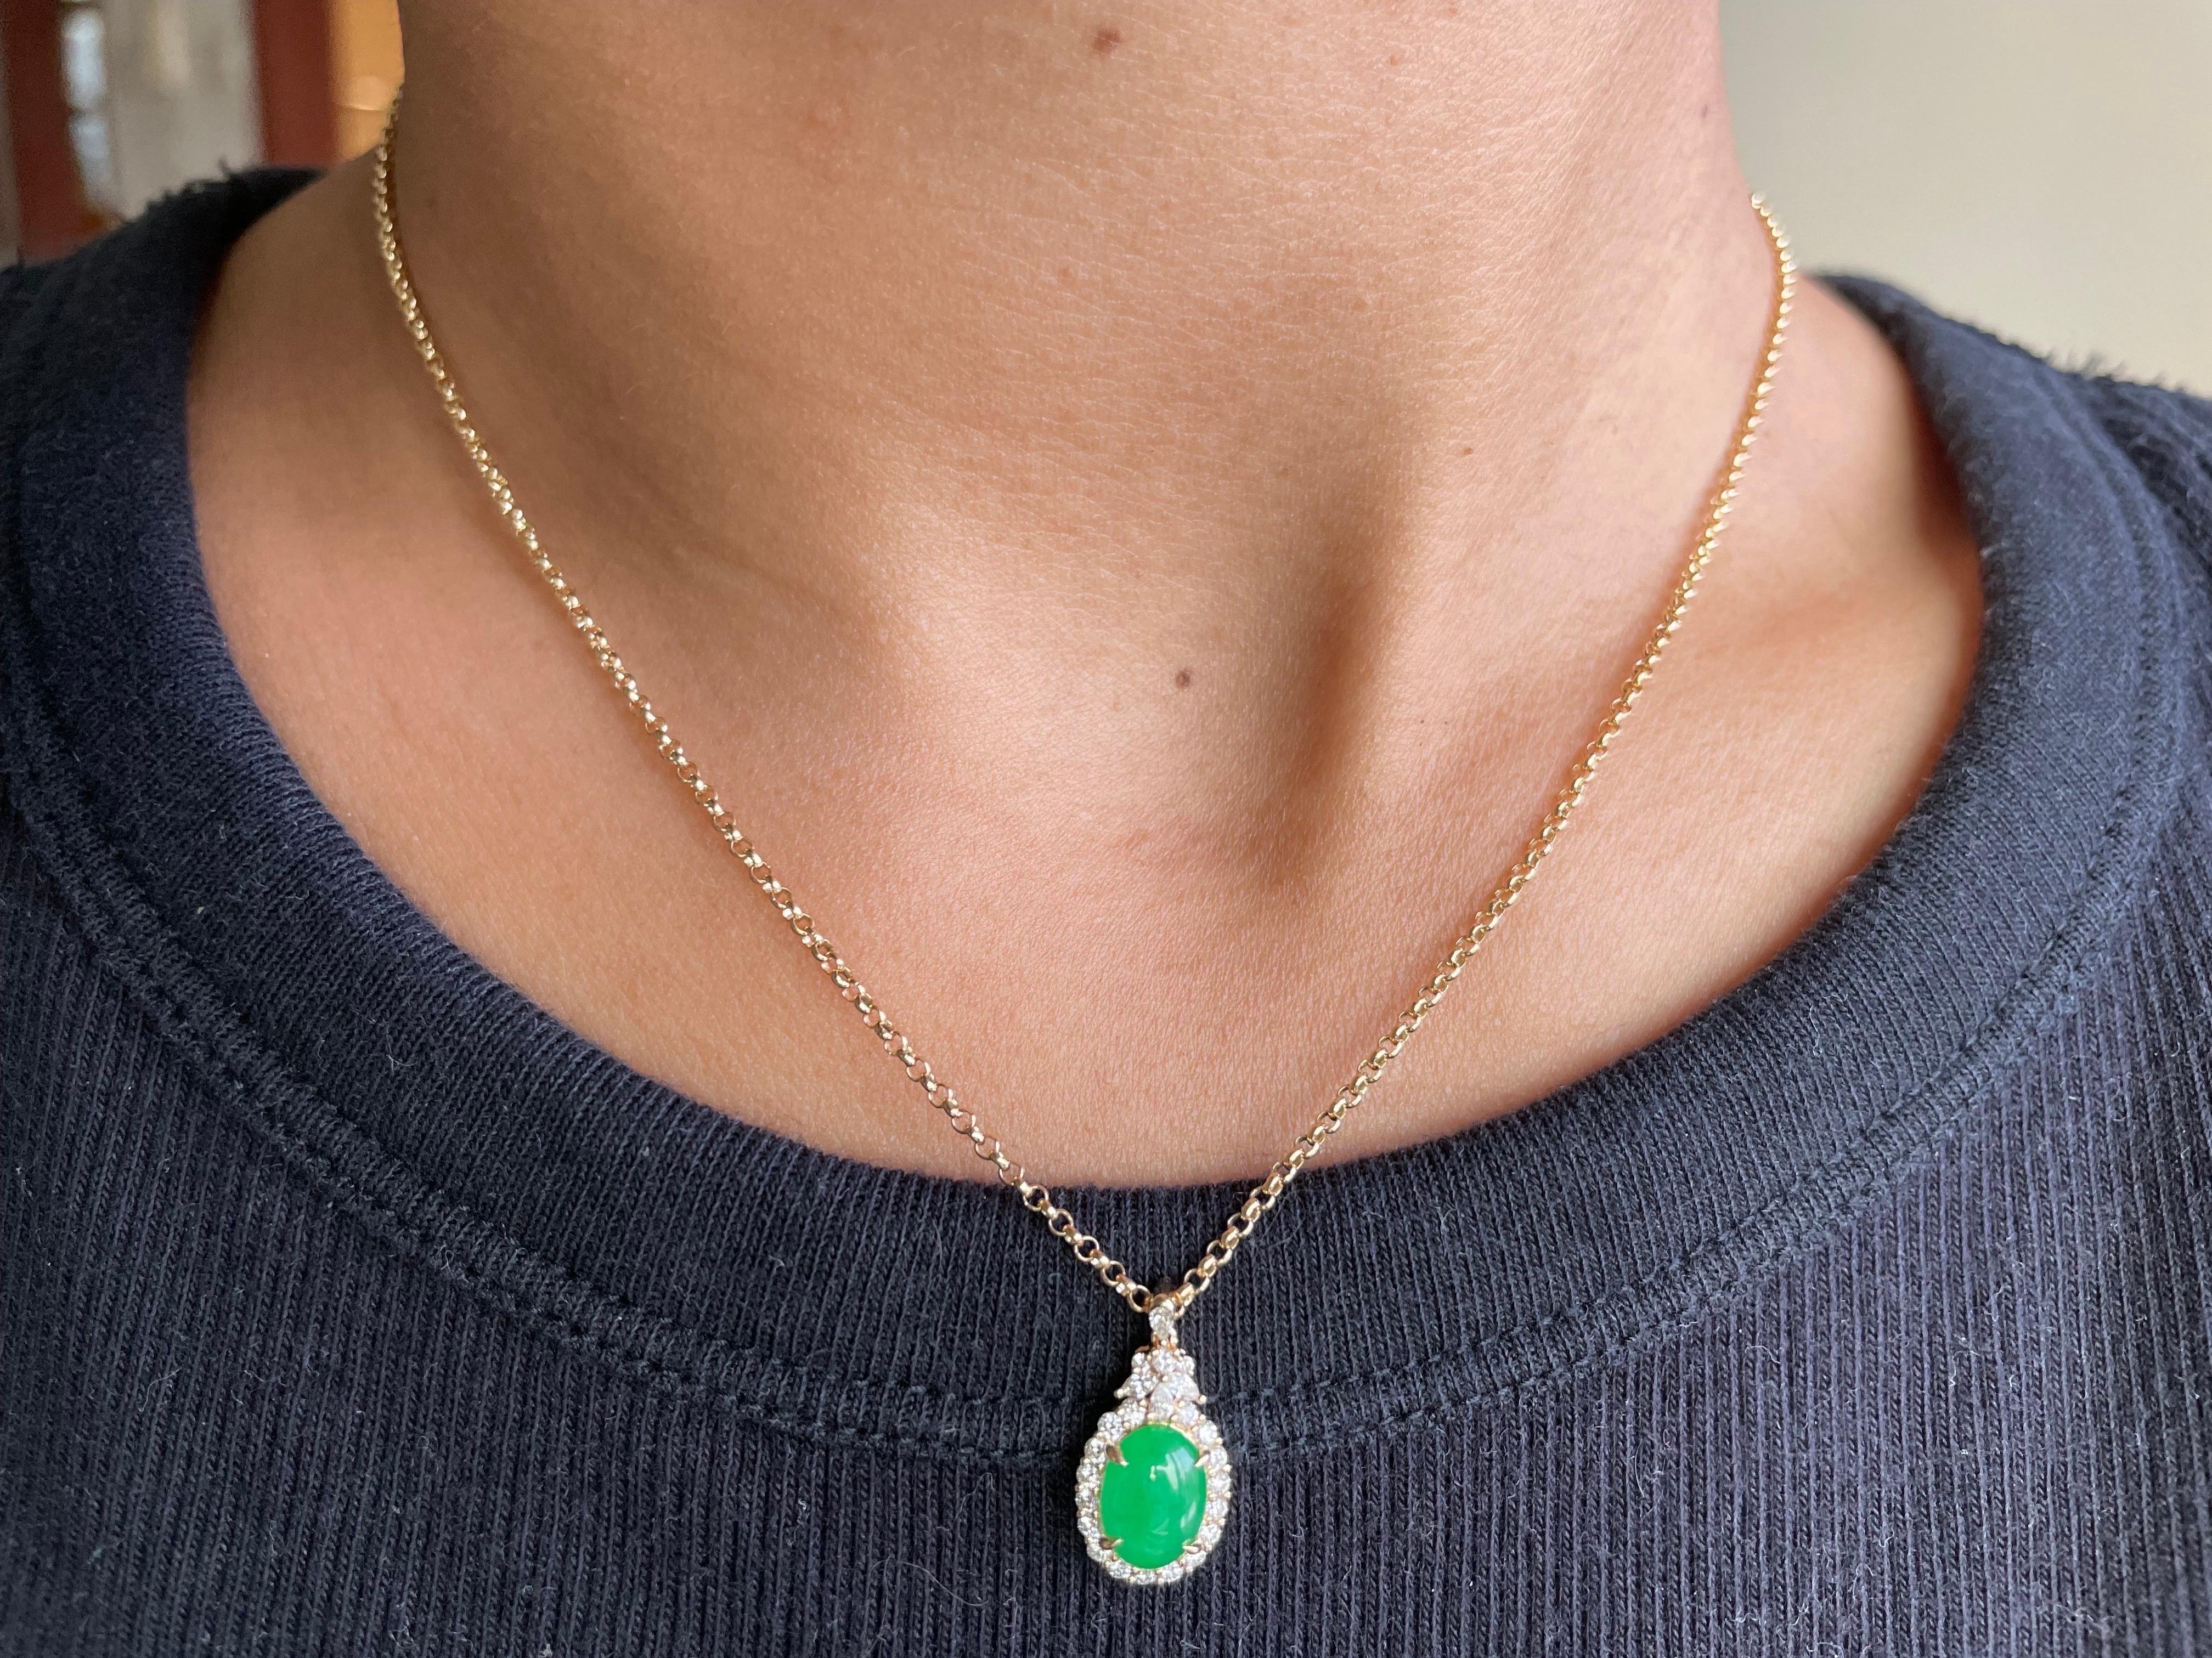 This pendant is crafted from 18k solid gold and adorned with a genuine Type A Jadeite Jade.

The pendant is set with a marquise and pear cut Natural Diamonds that sparkle and shine, adding an extra layer of luxury to the piece. It comes with a 18k